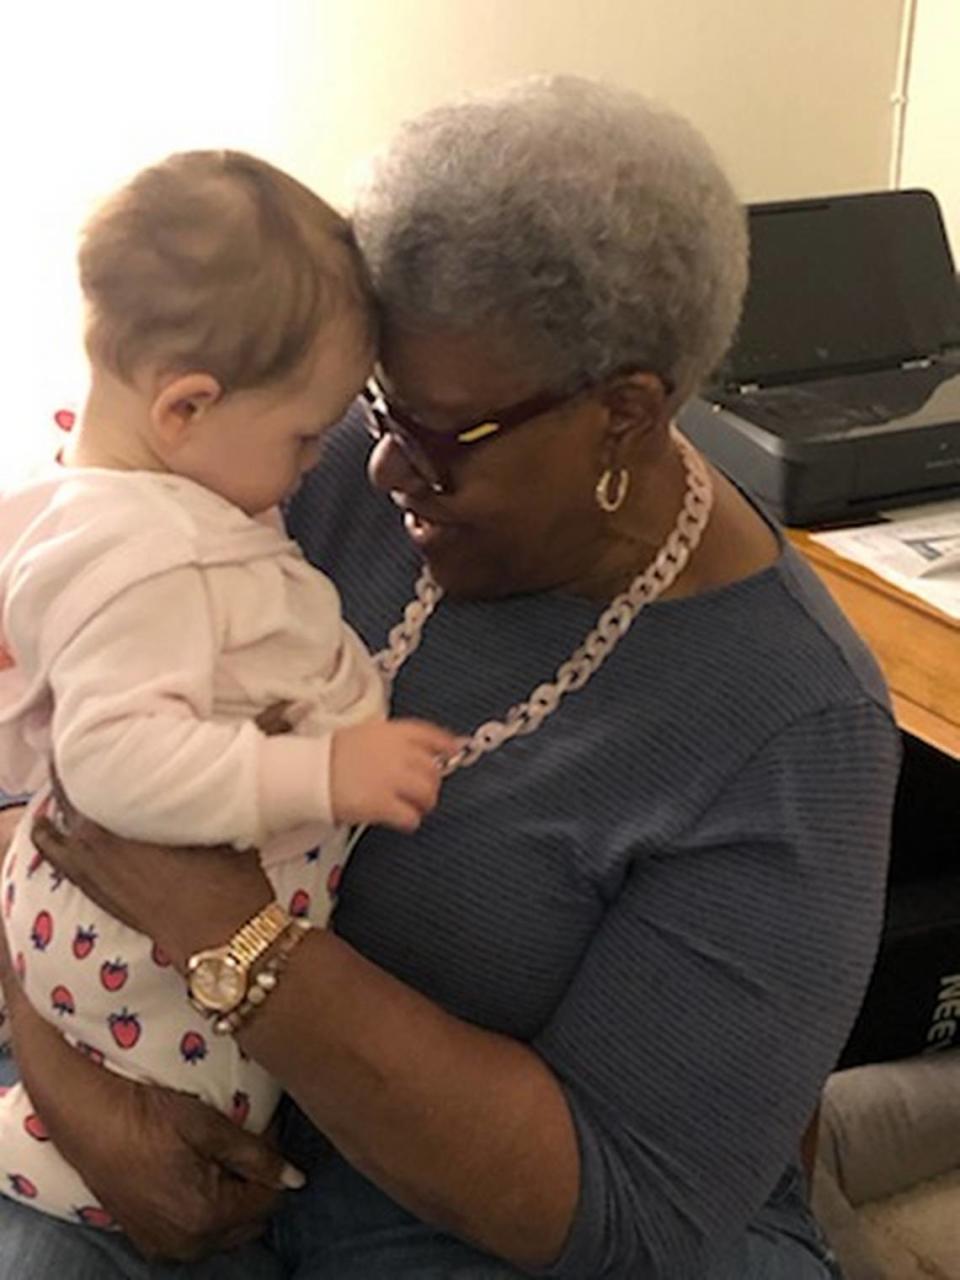 Bea Hines holding her 10-month-old great-granddaughter, Loretta Jane, for the first time on Monday, April 12, at the baby’s home in New York.